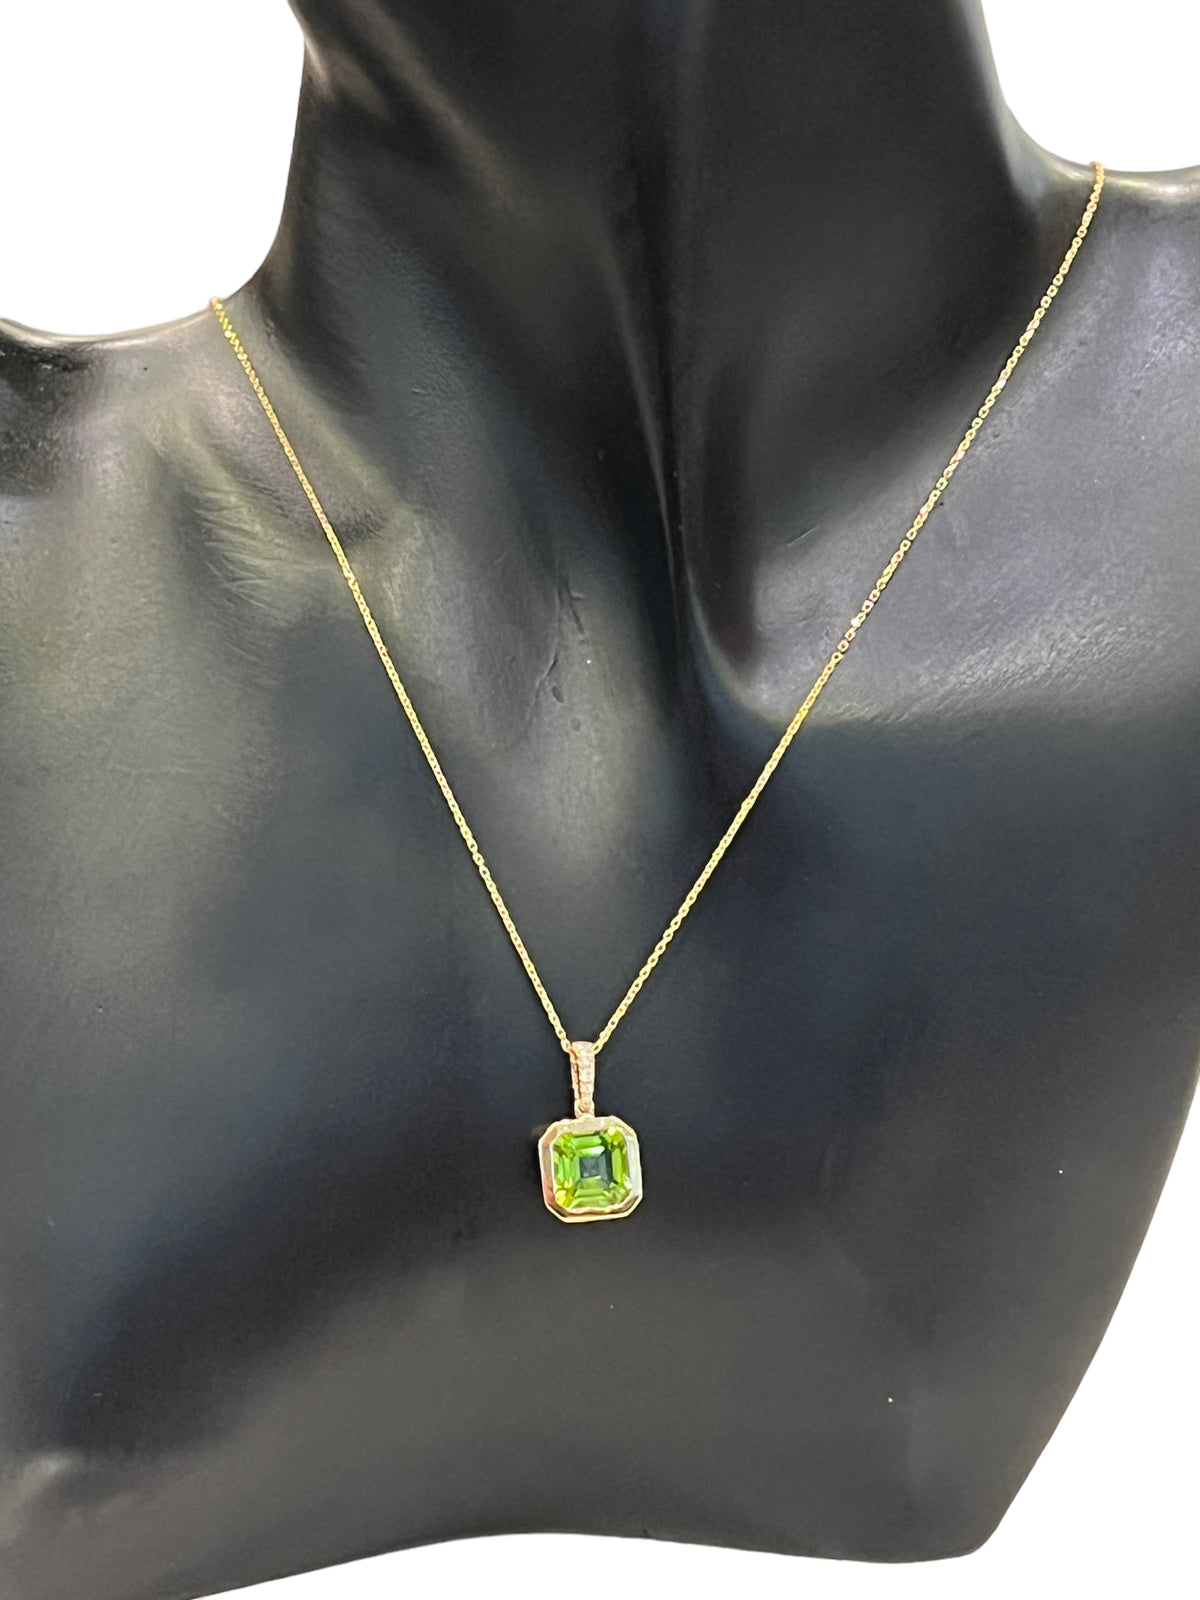 14K Yellow Gold 2.41cttw Peridot and 0.16cttw Diamond Necklace - 18 Inches